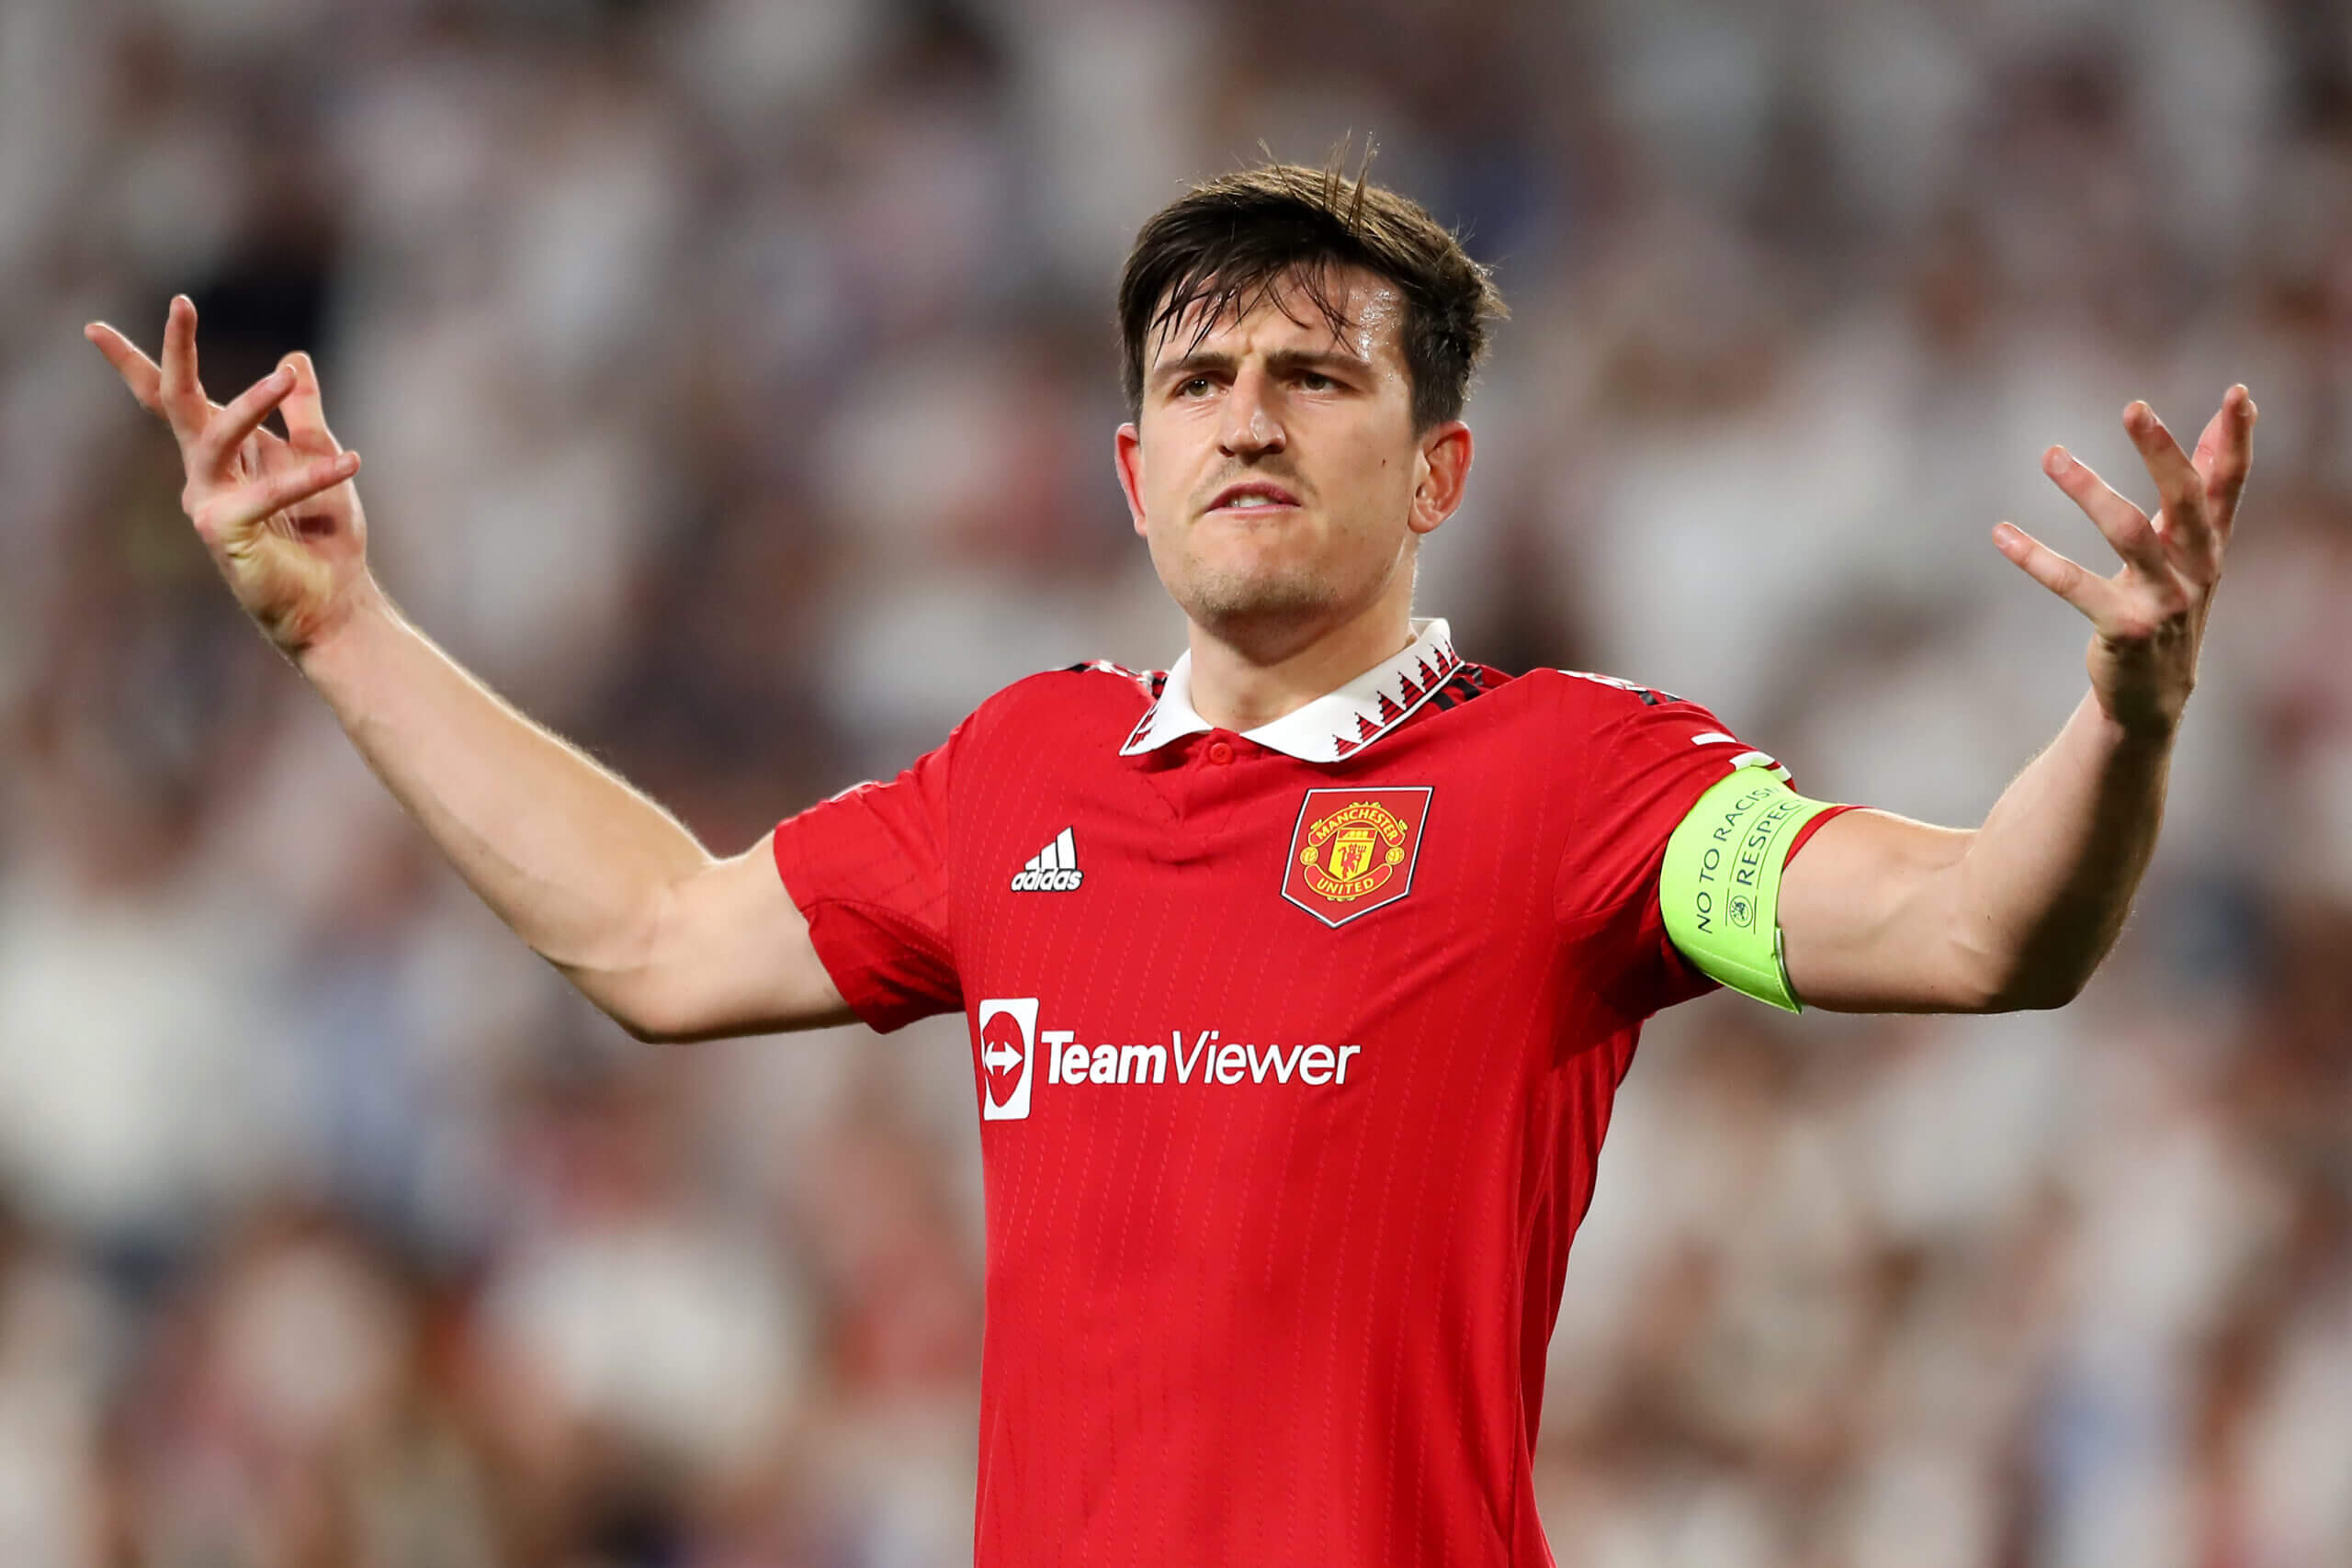 Man Utd Defender Maguire Named EPL Player Of The Month In November